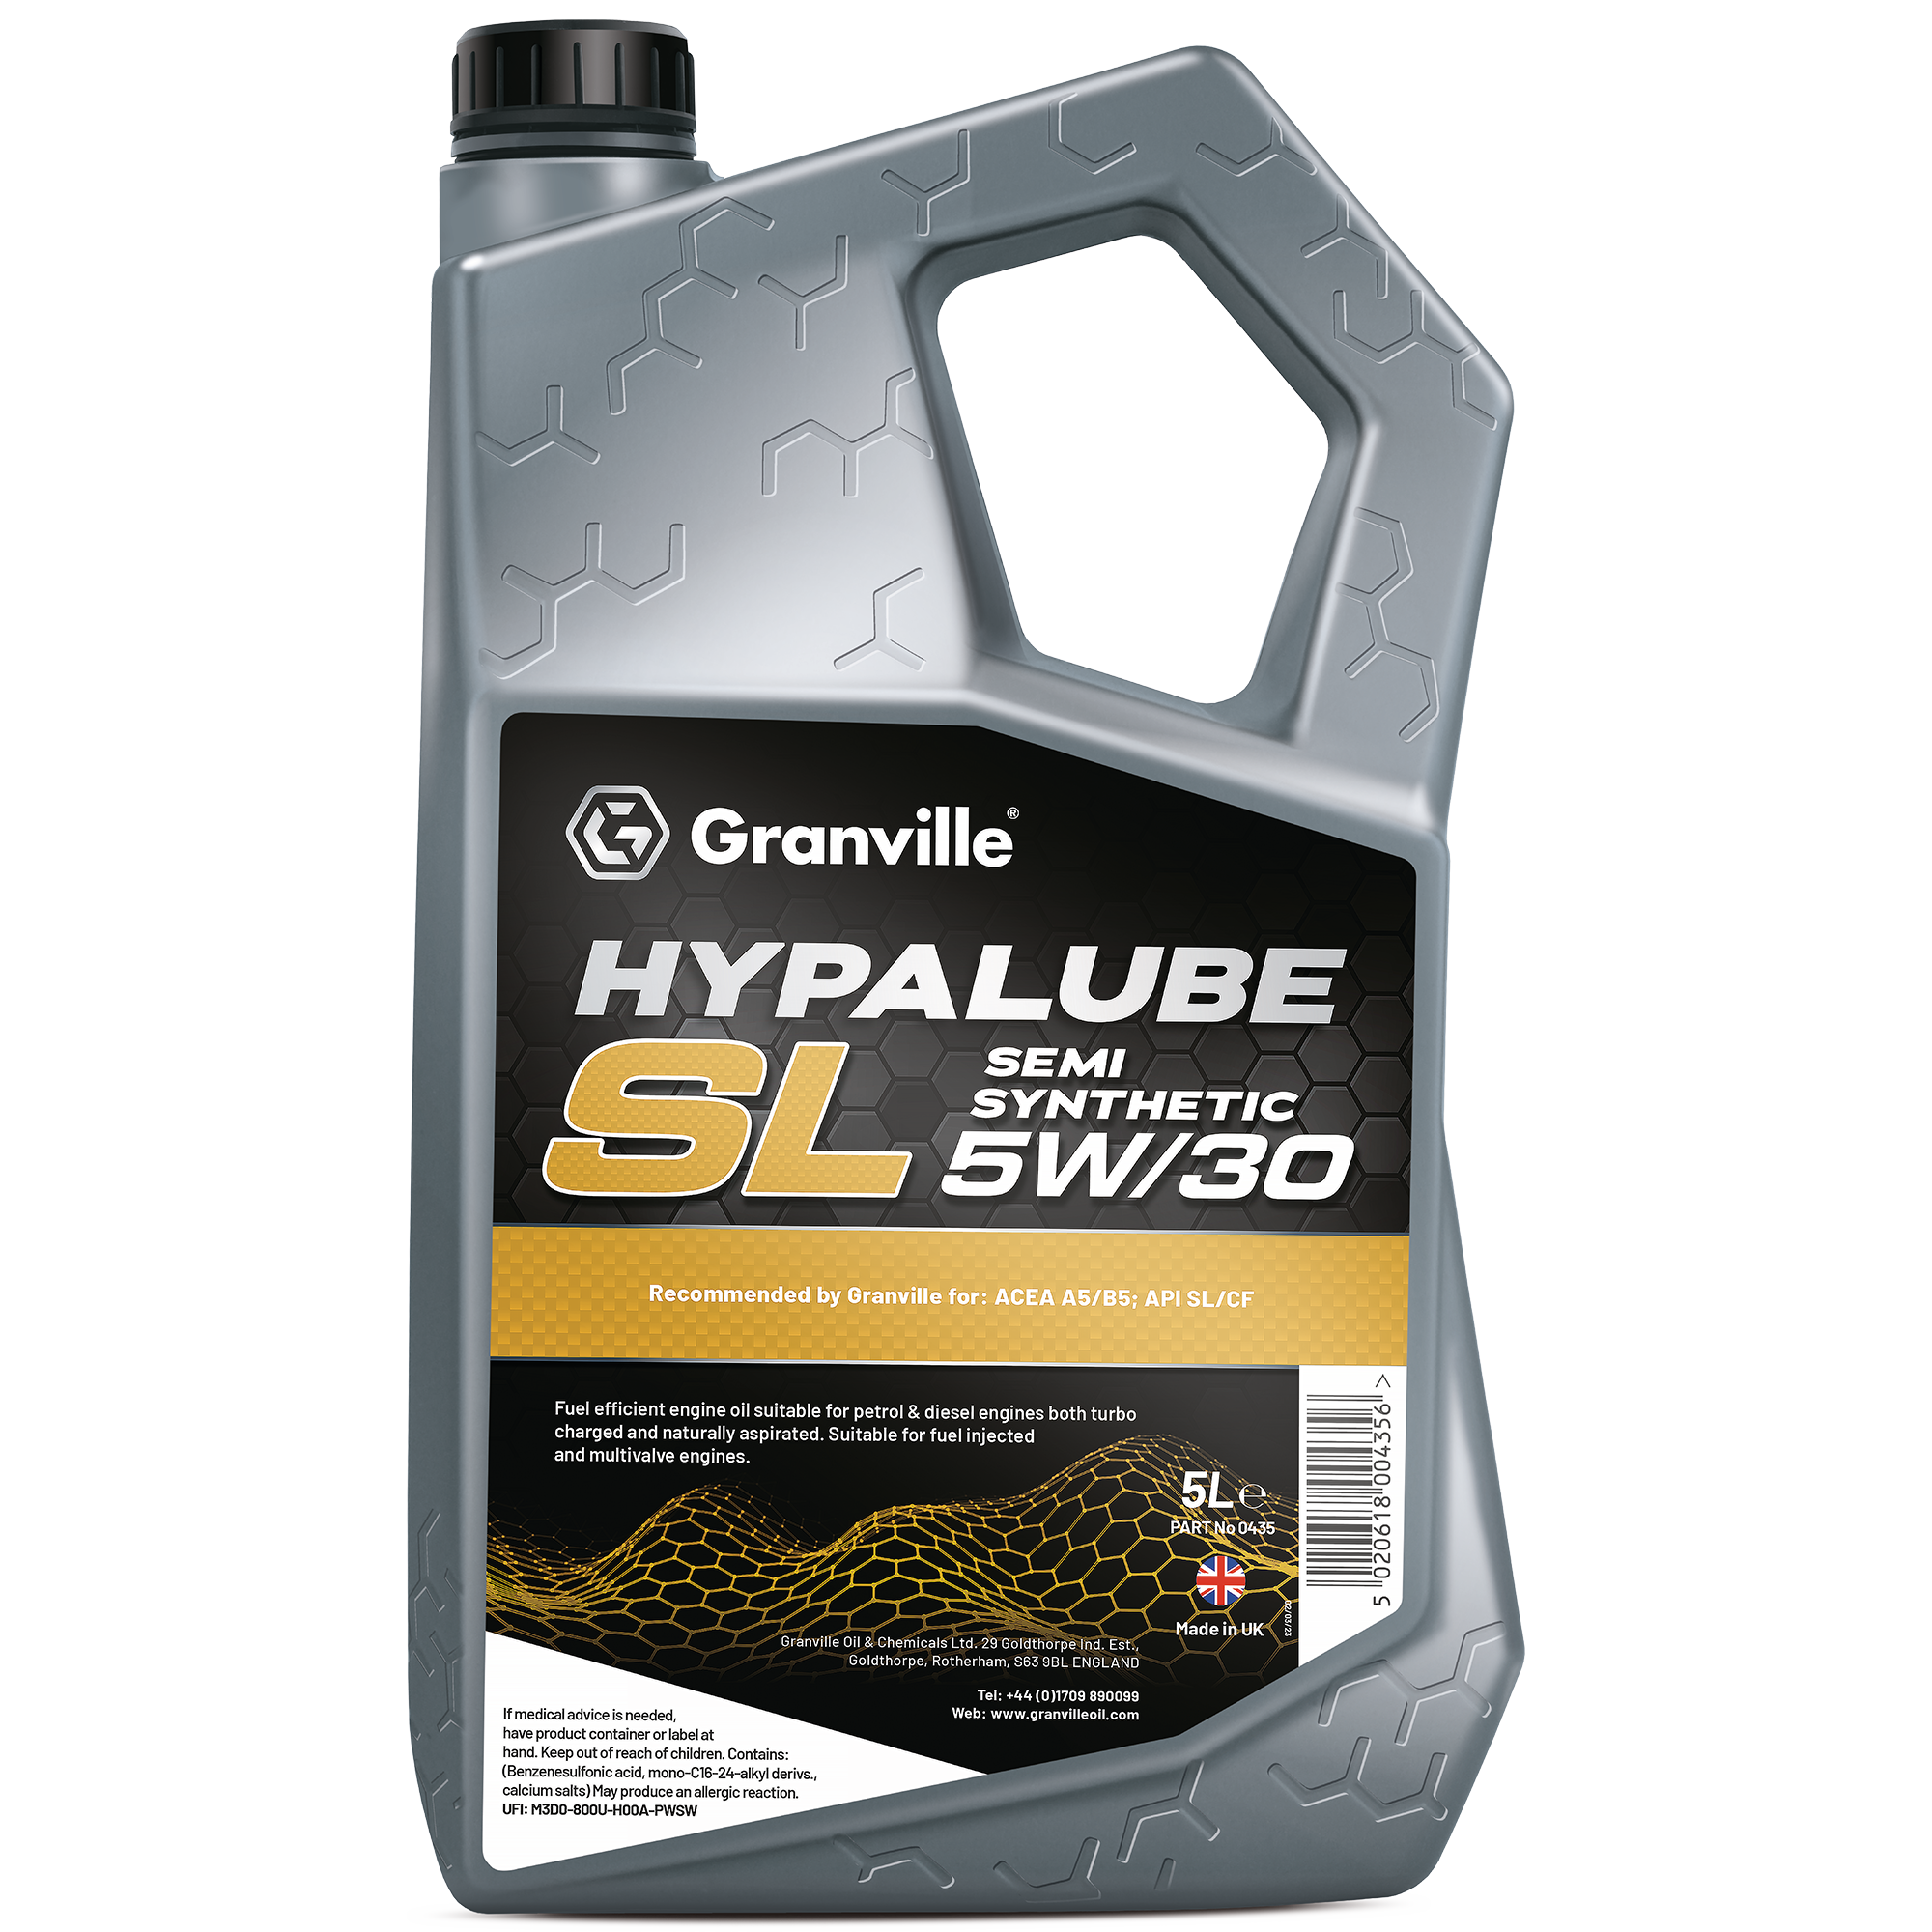 Granville Hypalube Semi Synthetic 5W/30 5 Litres